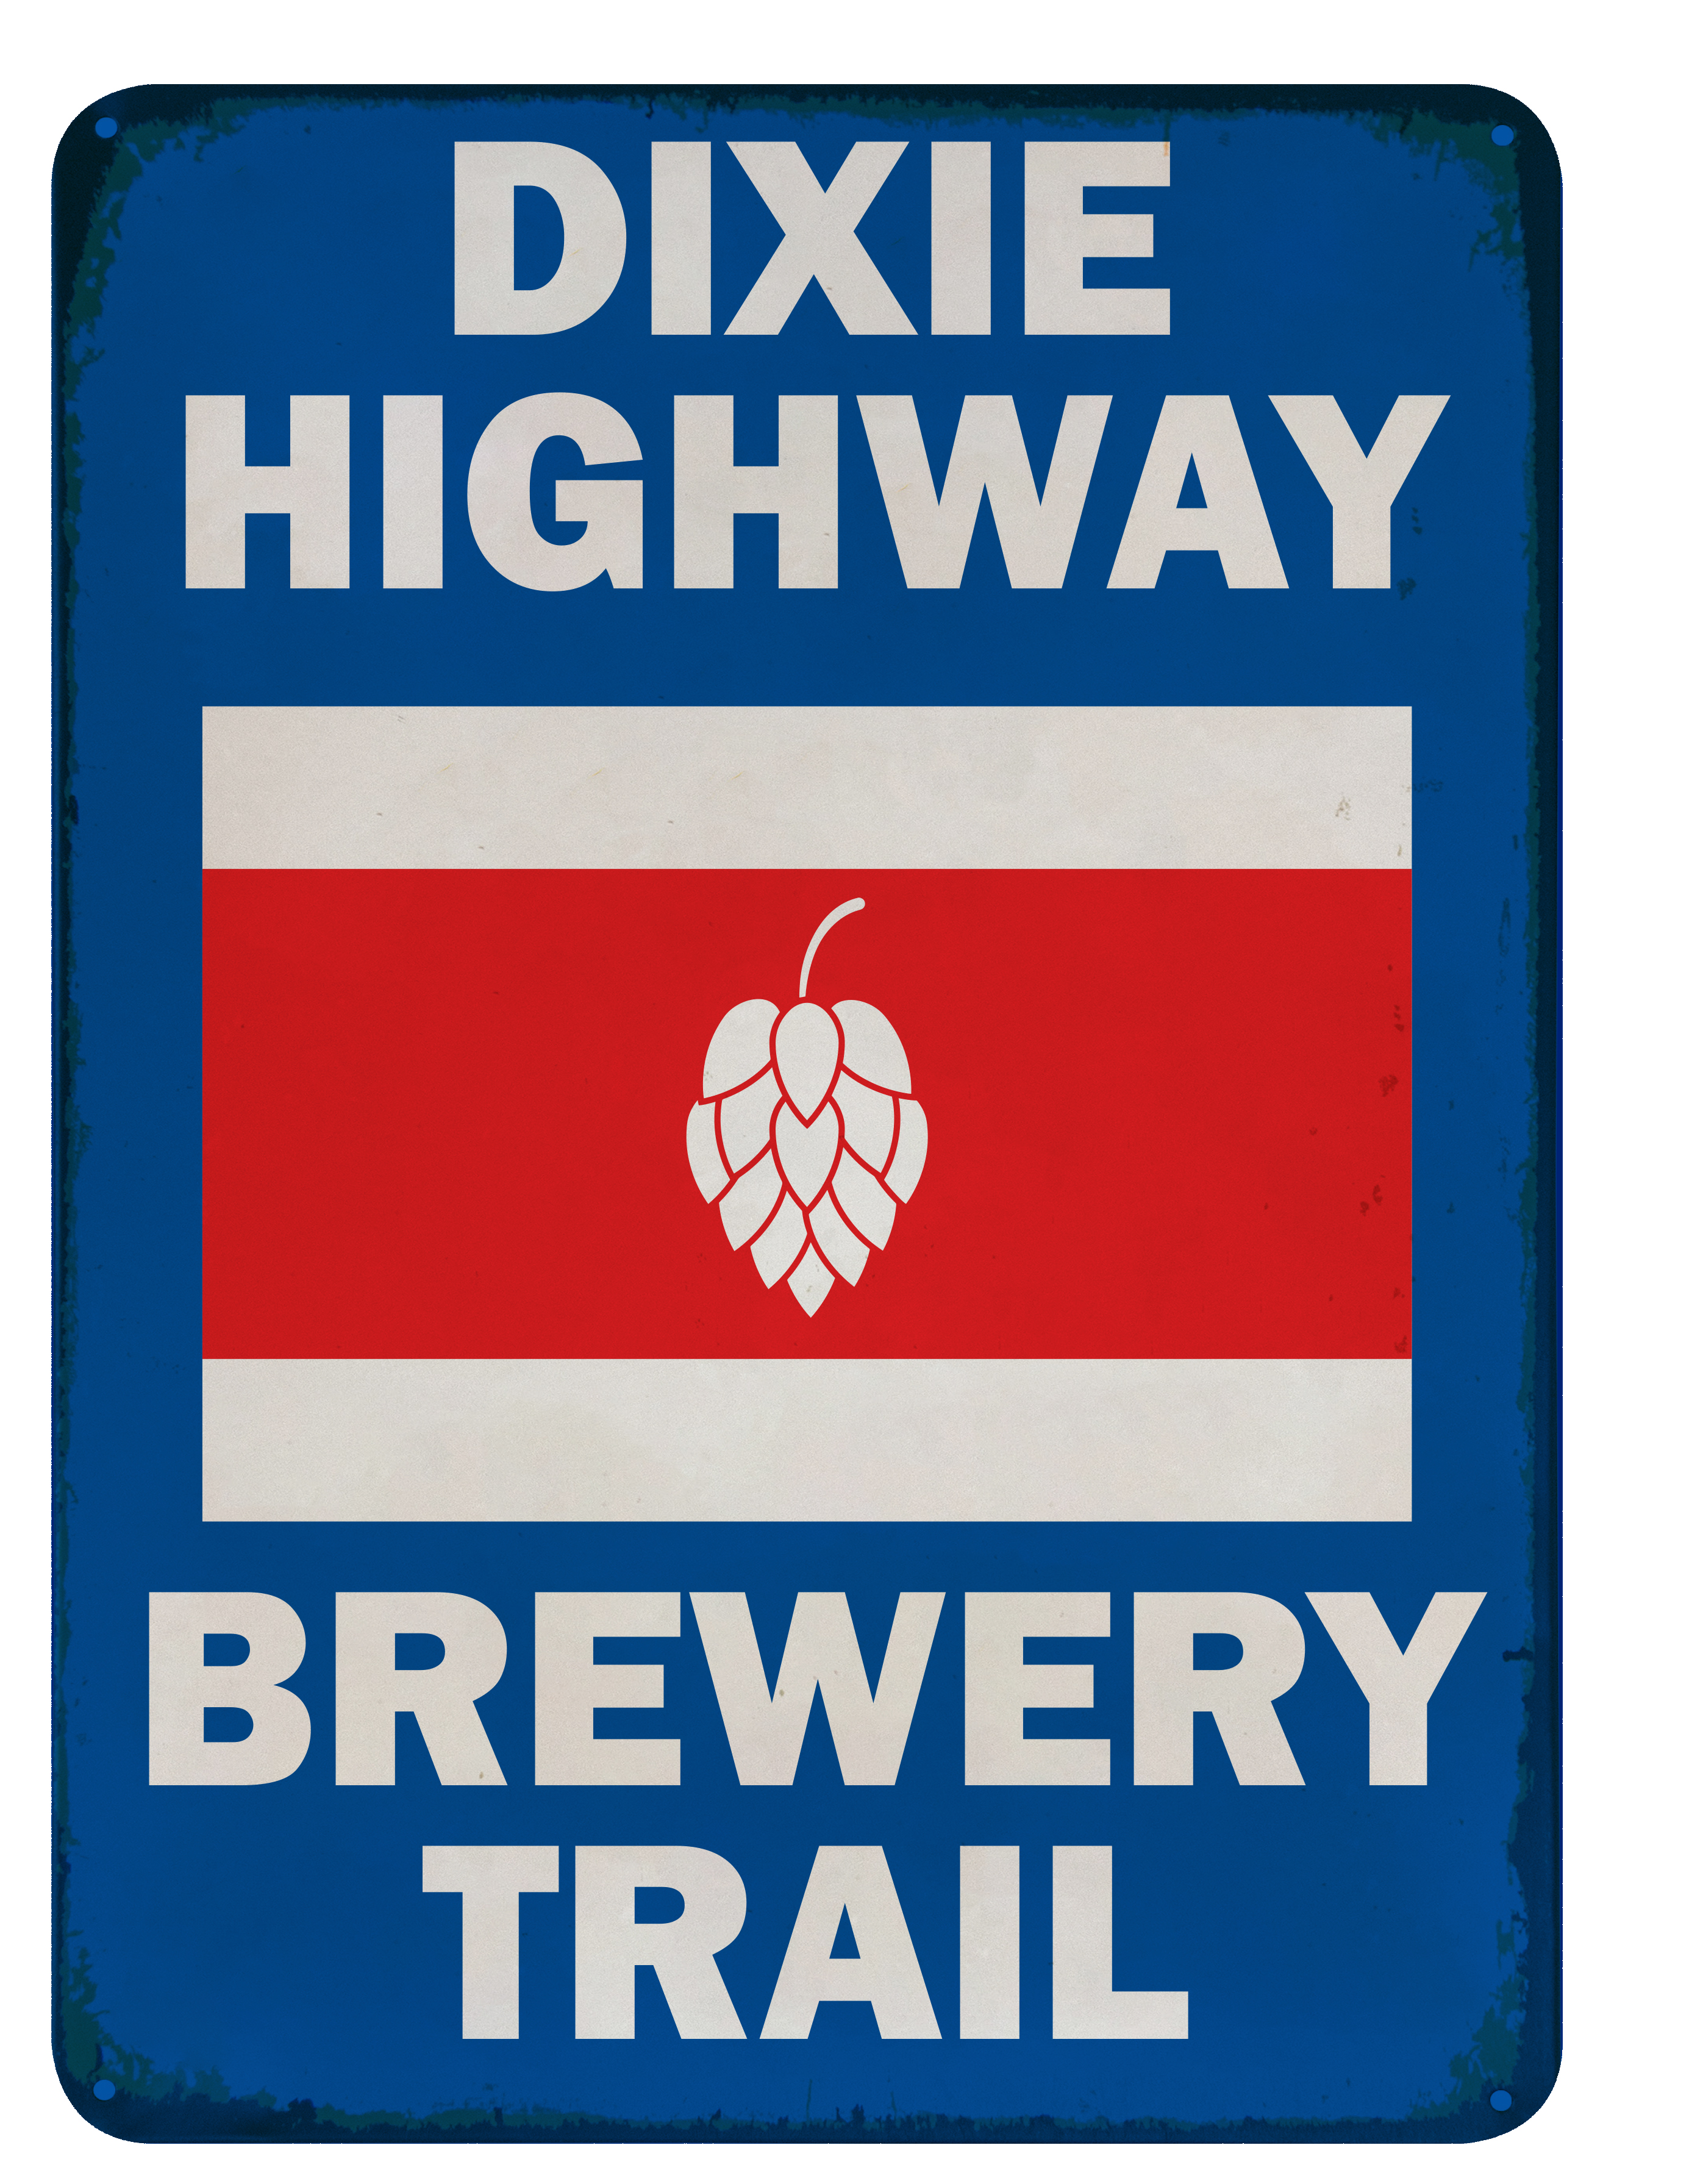 Dixie Highway Brewery Trail Illinois Sticker Beer Logo Advertising NEW 